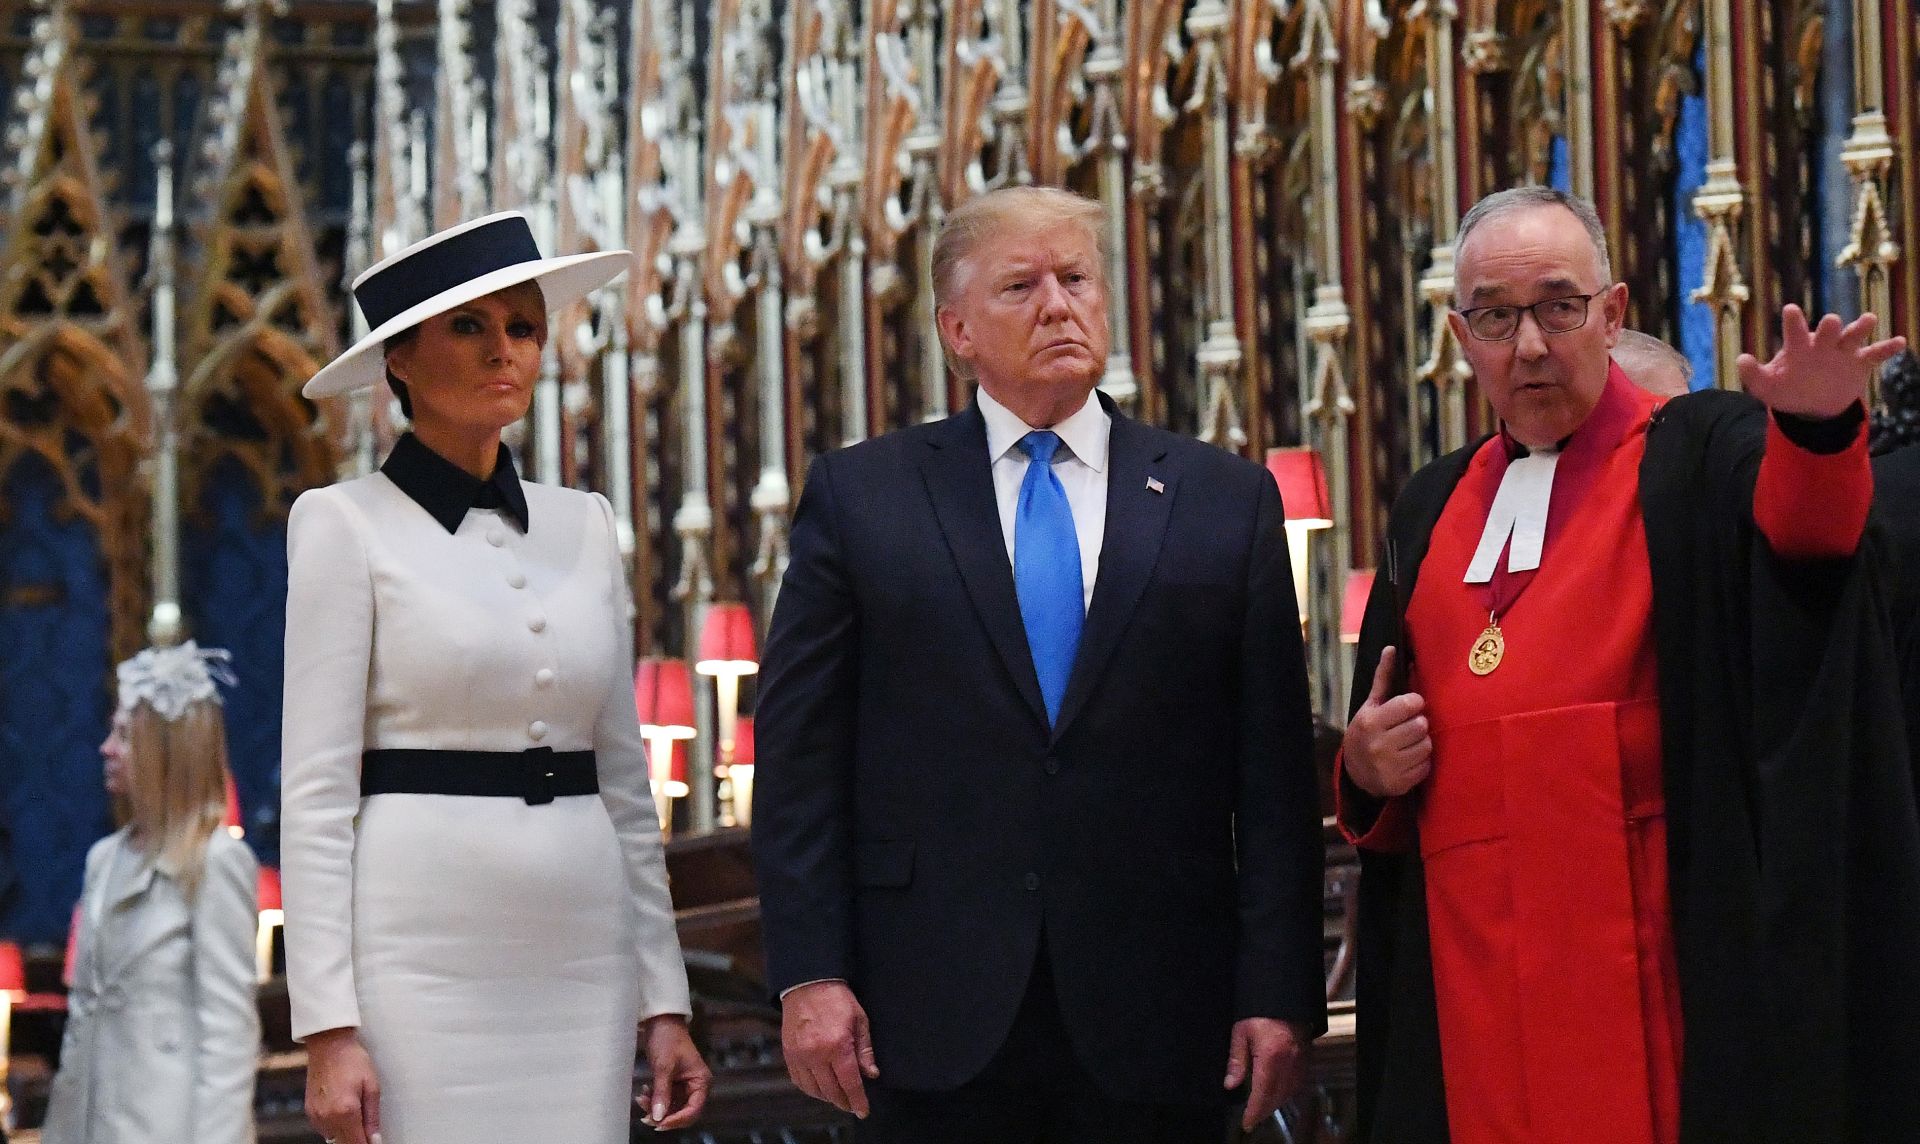 epa07622810 US President Donald J. Trump (C) with Dean of Westminster and a chaplain to the Queen Elizabeth II John Hall (R) and US First Lady Melania Trump (L) take a tour of Westminster Abbey in London, Britain, 03 June 2019. US President Trump and his wife are on a three-day official visit to the UK.  EPA/ANDY RAIN